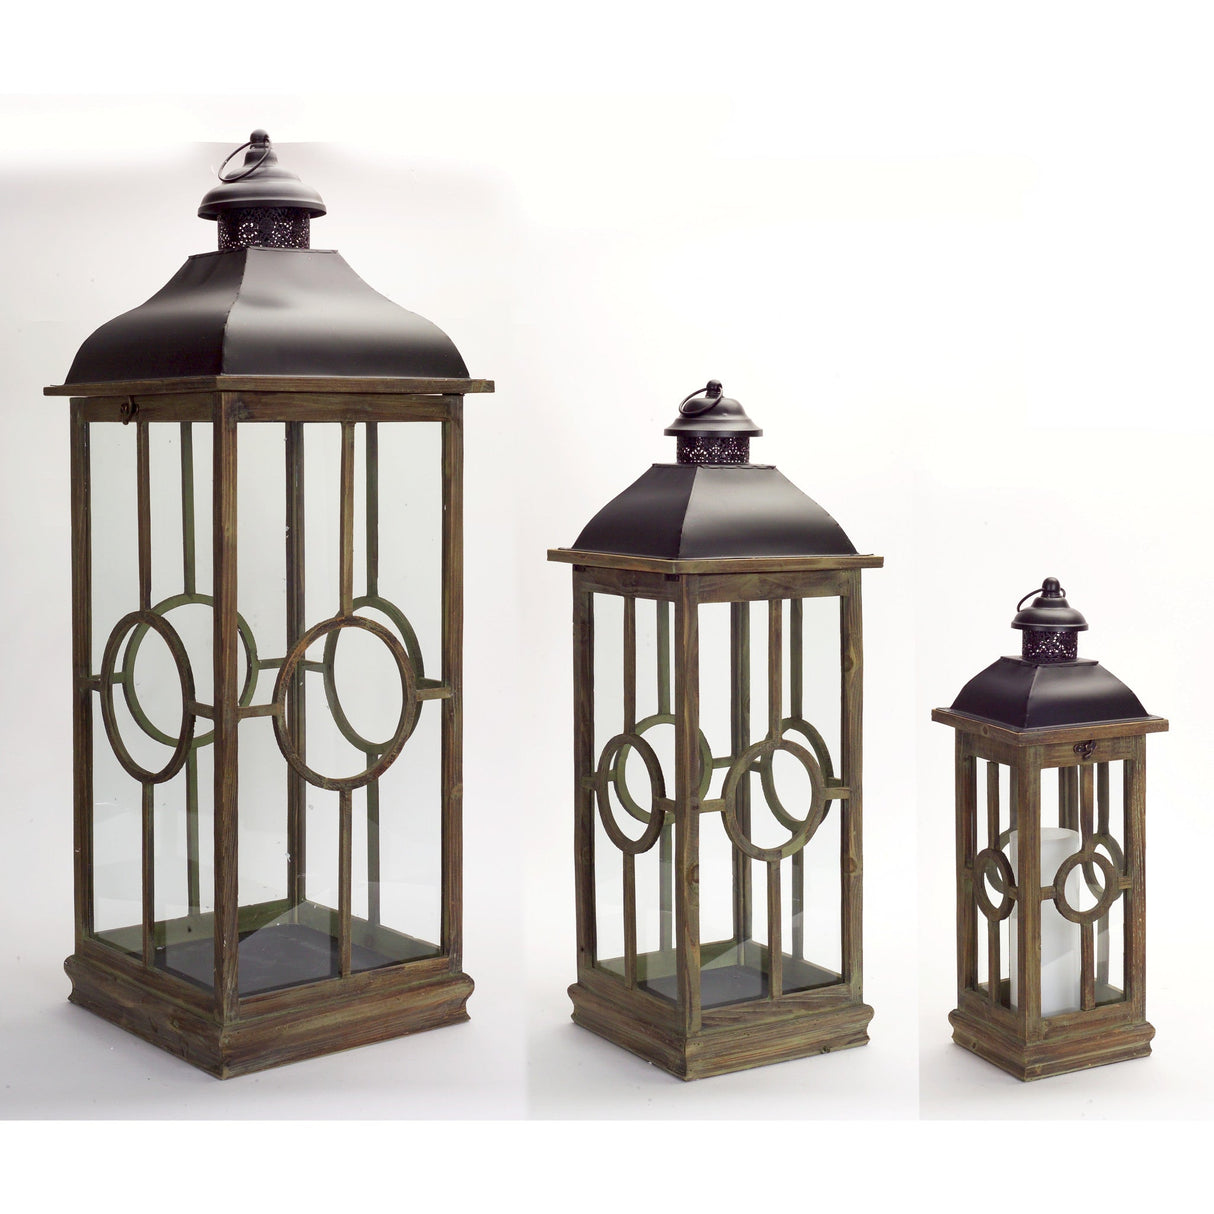 Flameless Three Candles Floor Lantern - Tuesday Morning-Candle Holders